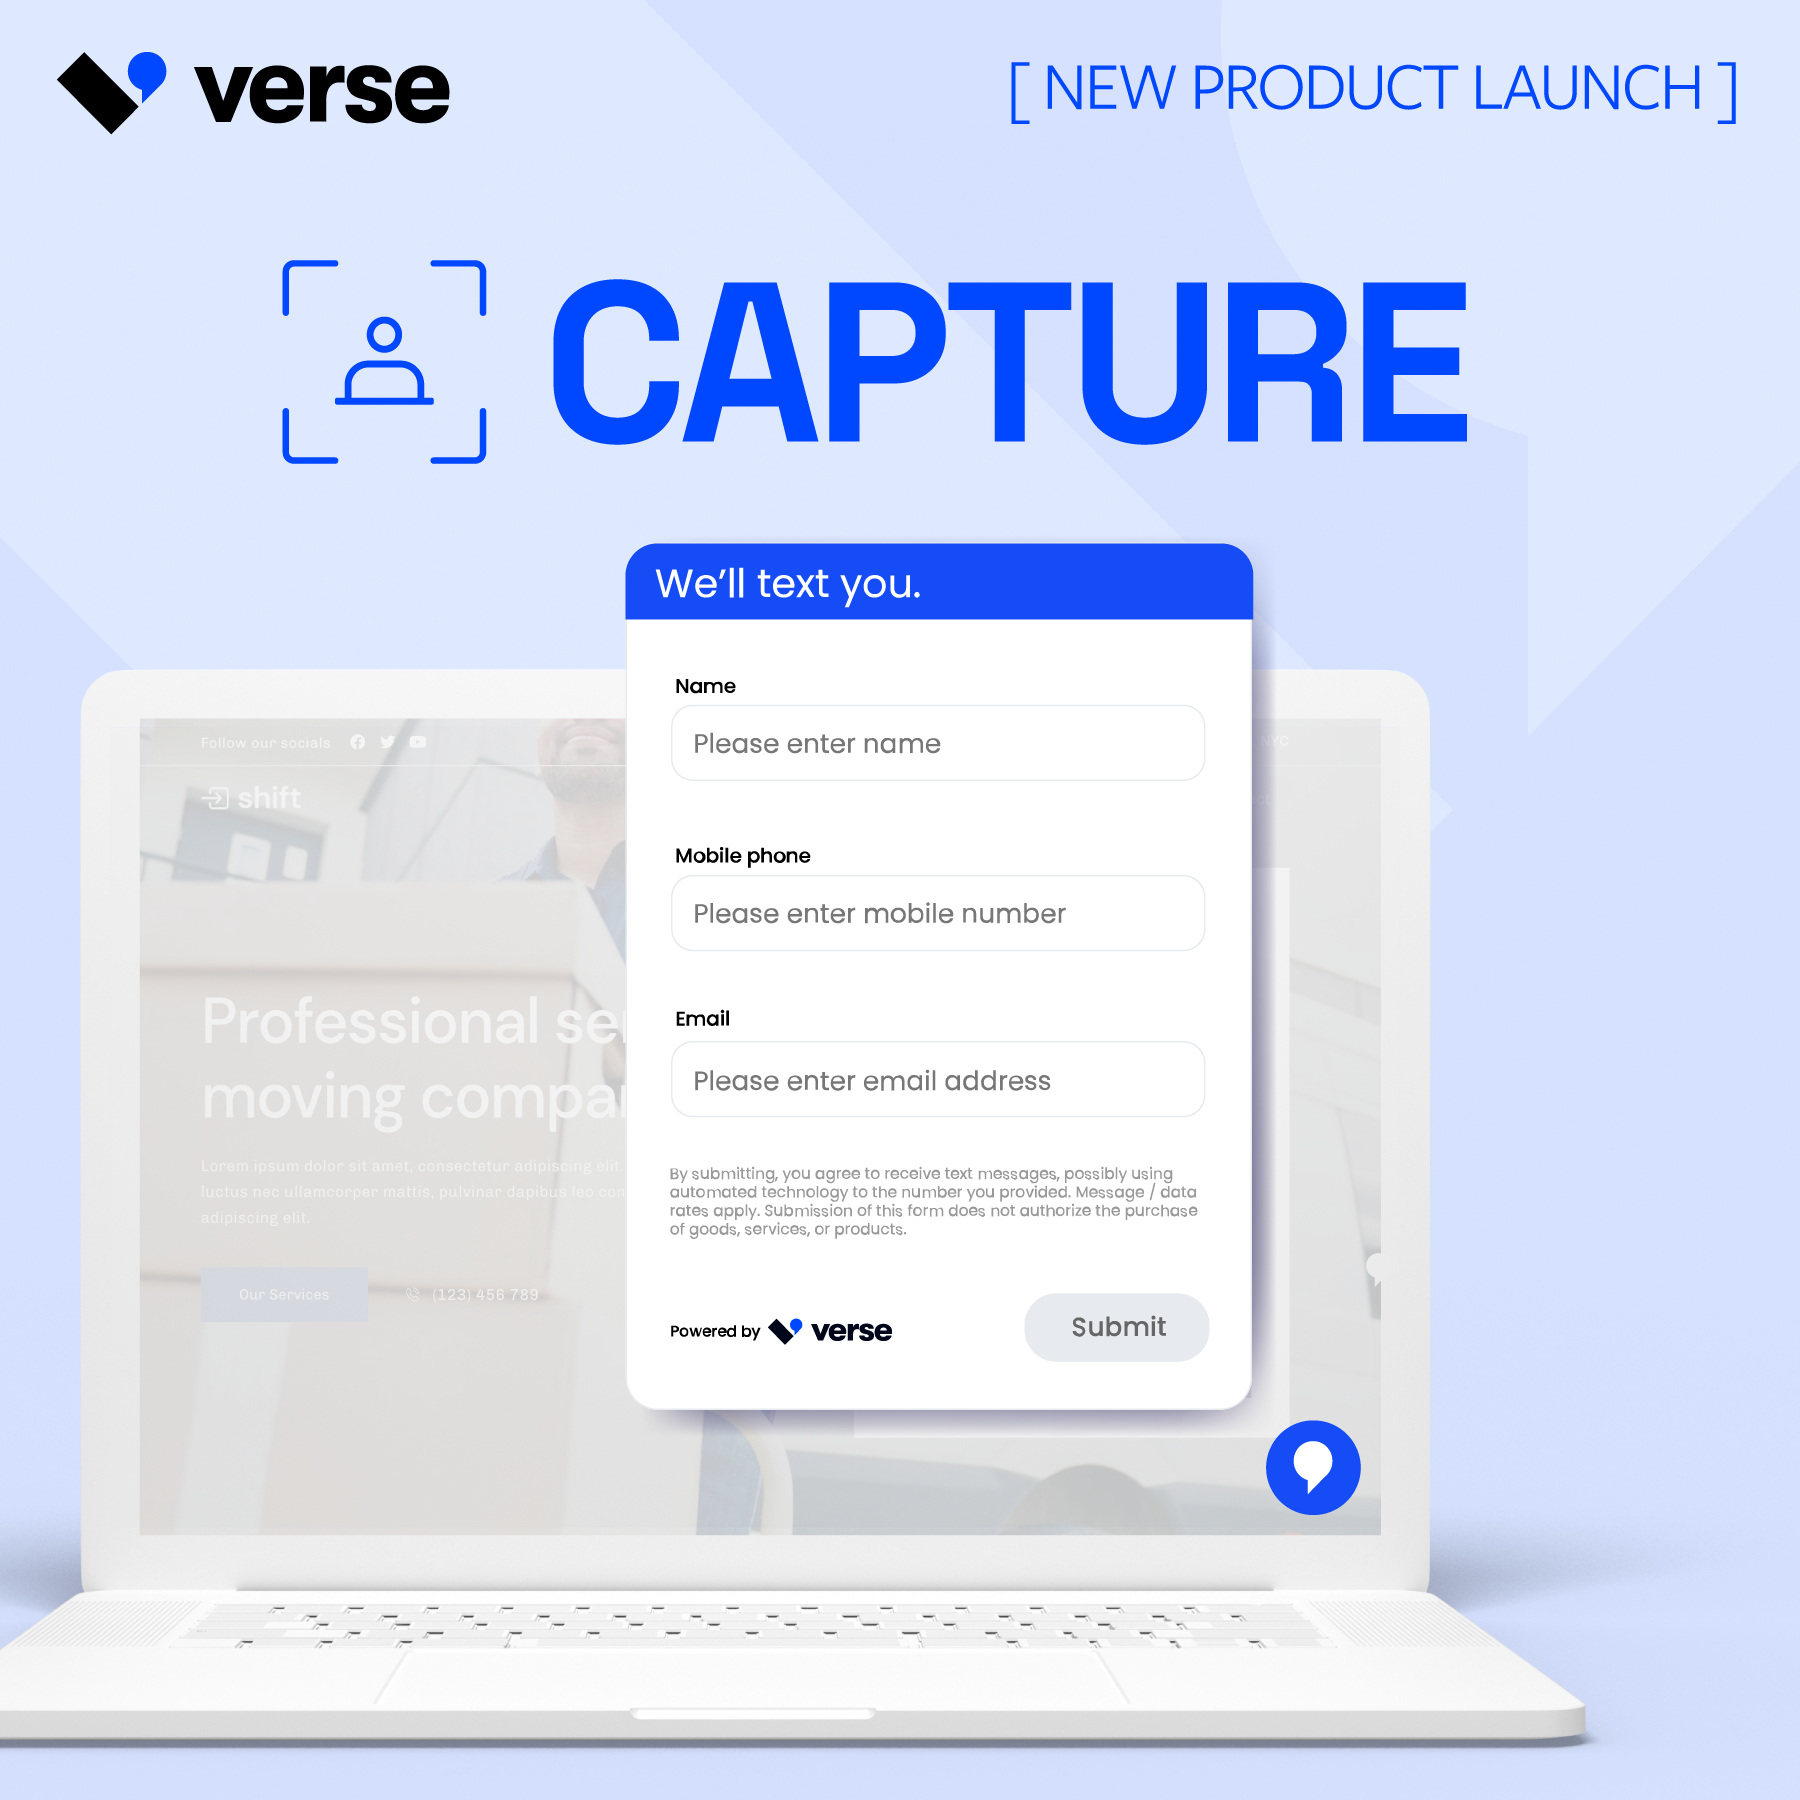 Verse Announces the Release of Verse Capture to Bring the Power of Texting and Conversational AI to the Massive SMB Market